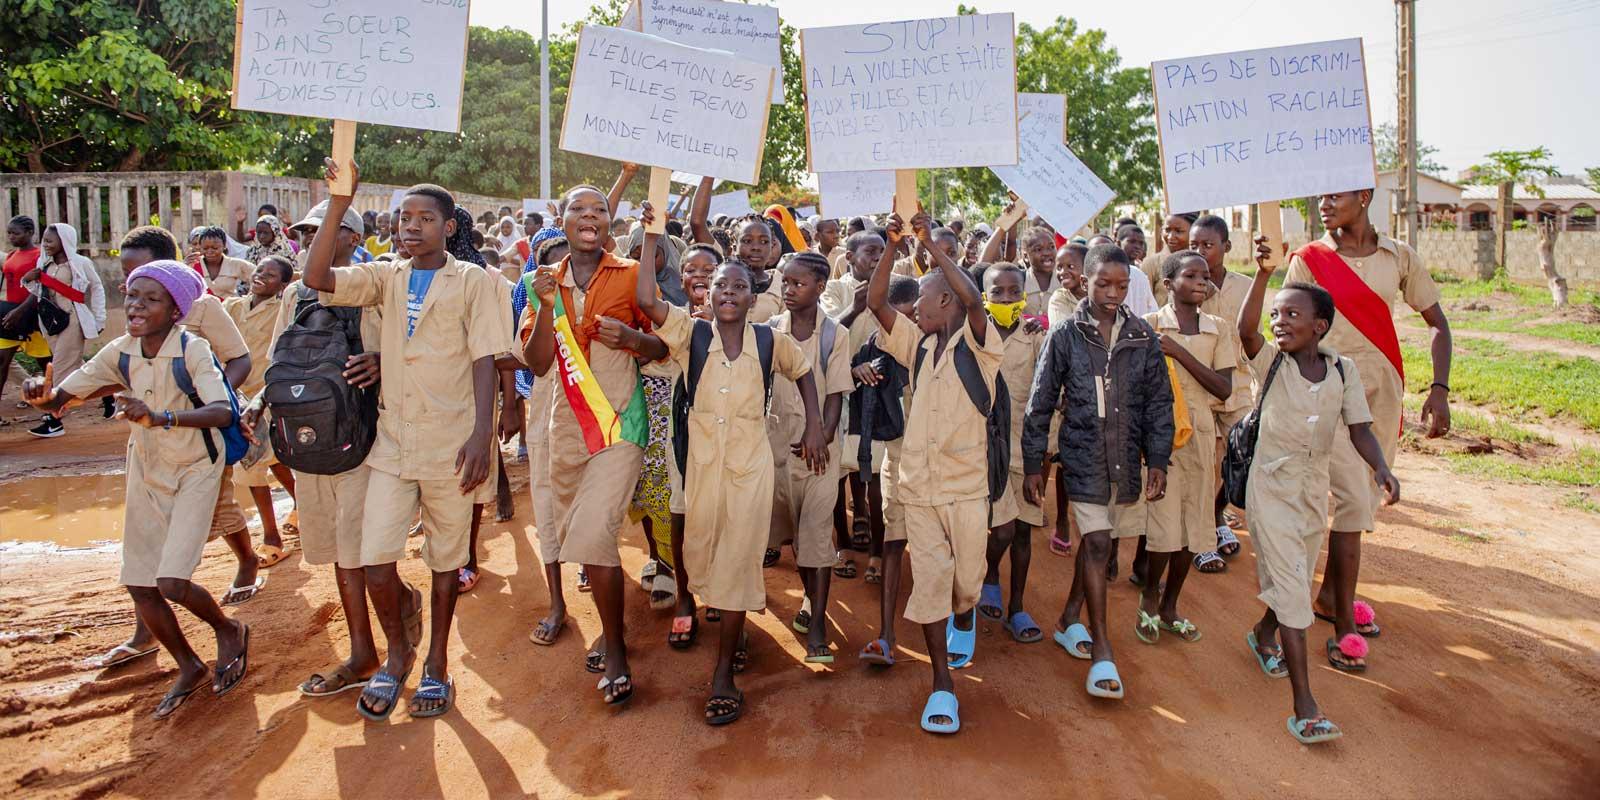 Children in Africa rallying for education. 